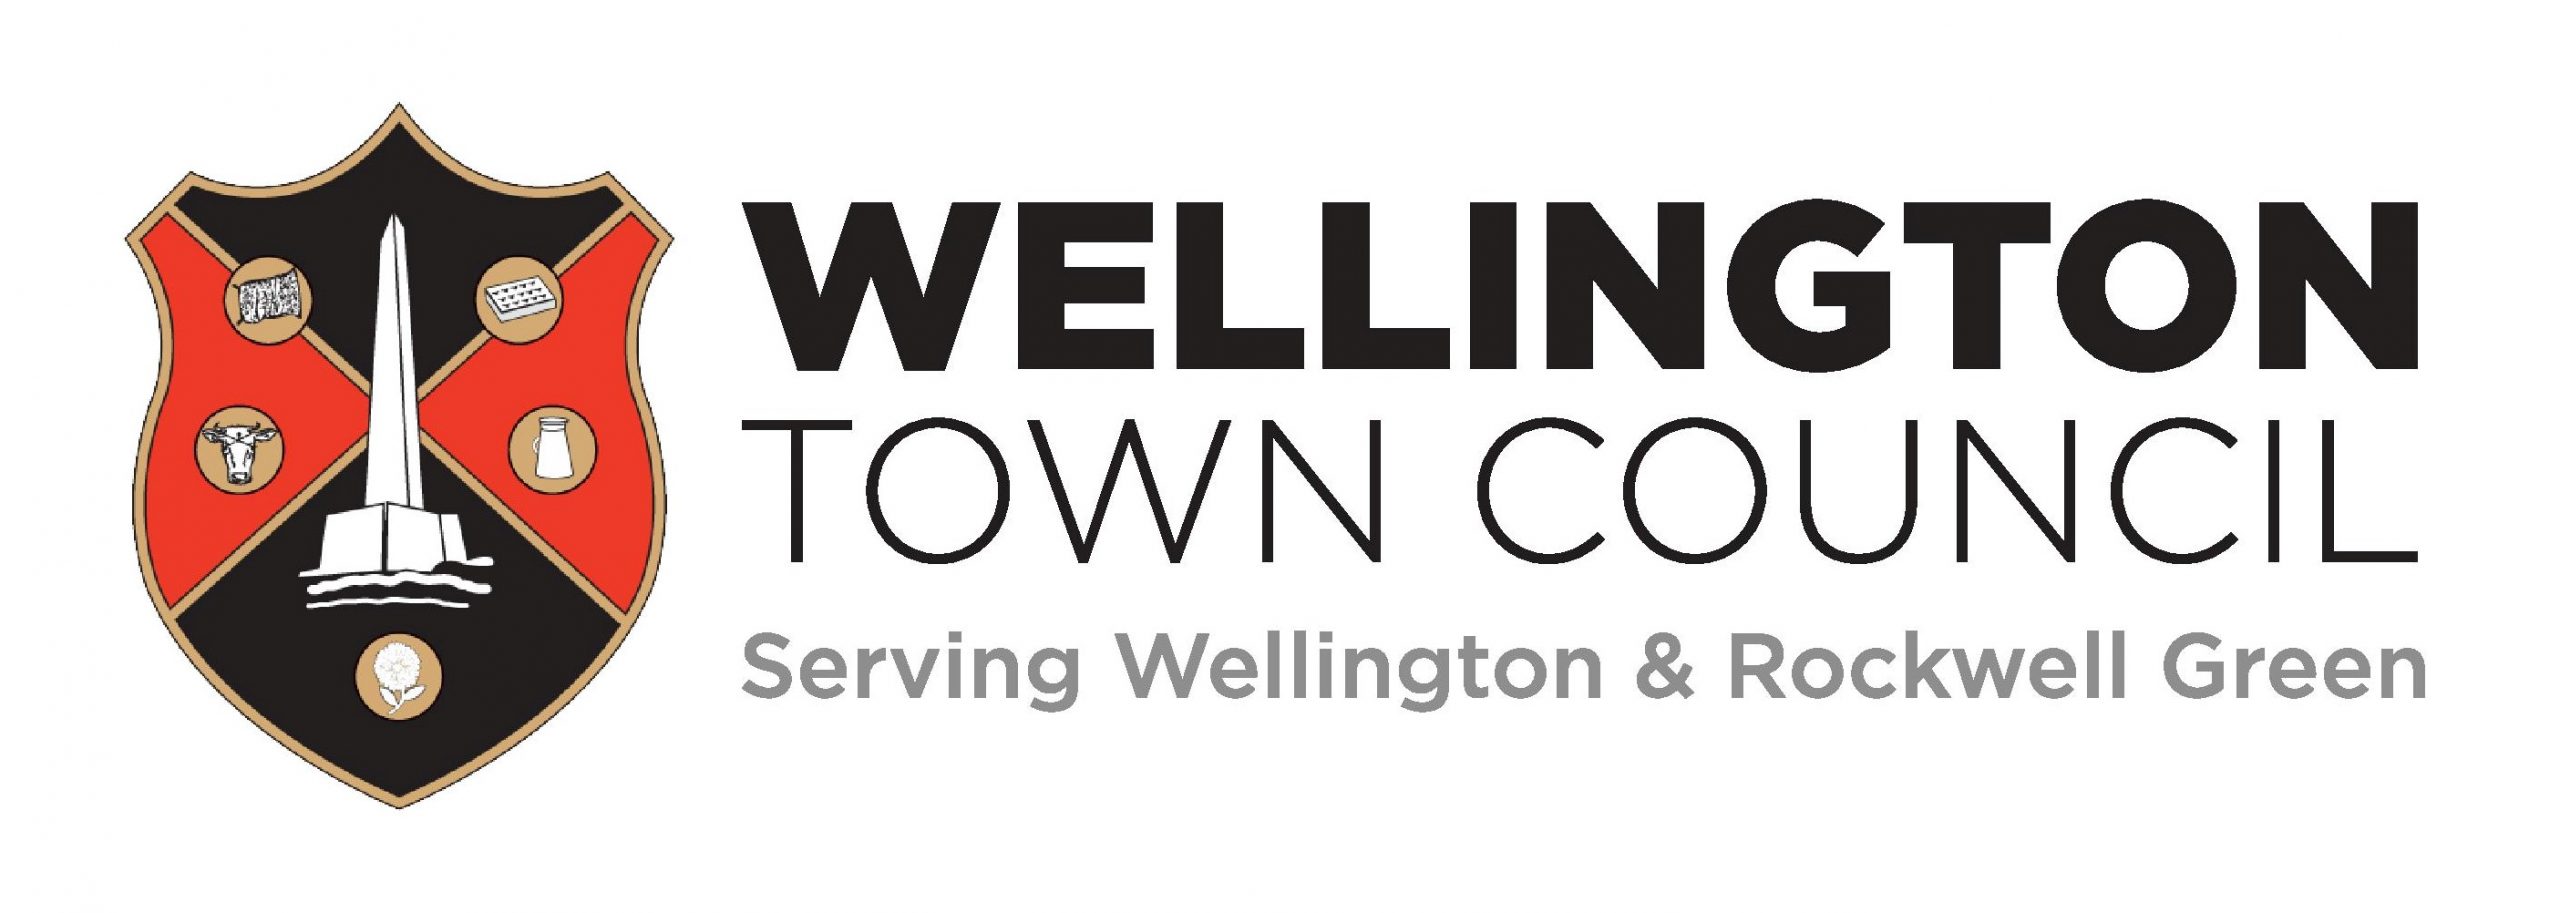 Which Council Does What? - Wellington Town Council